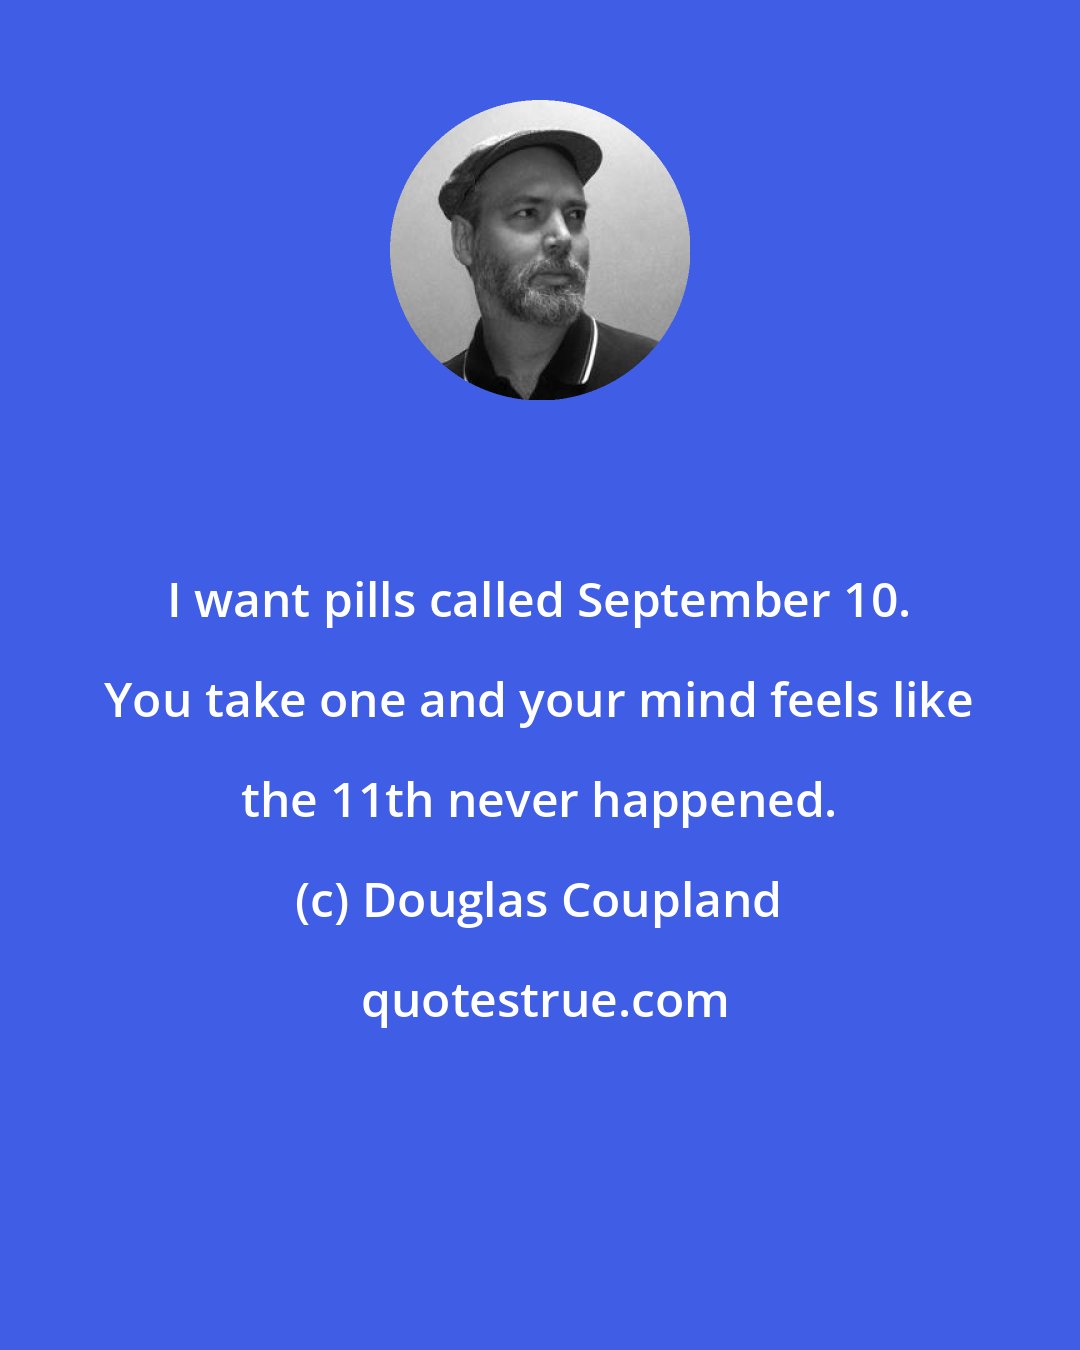 Douglas Coupland: I want pills called September 10. You take one and your mind feels like the 11th never happened.